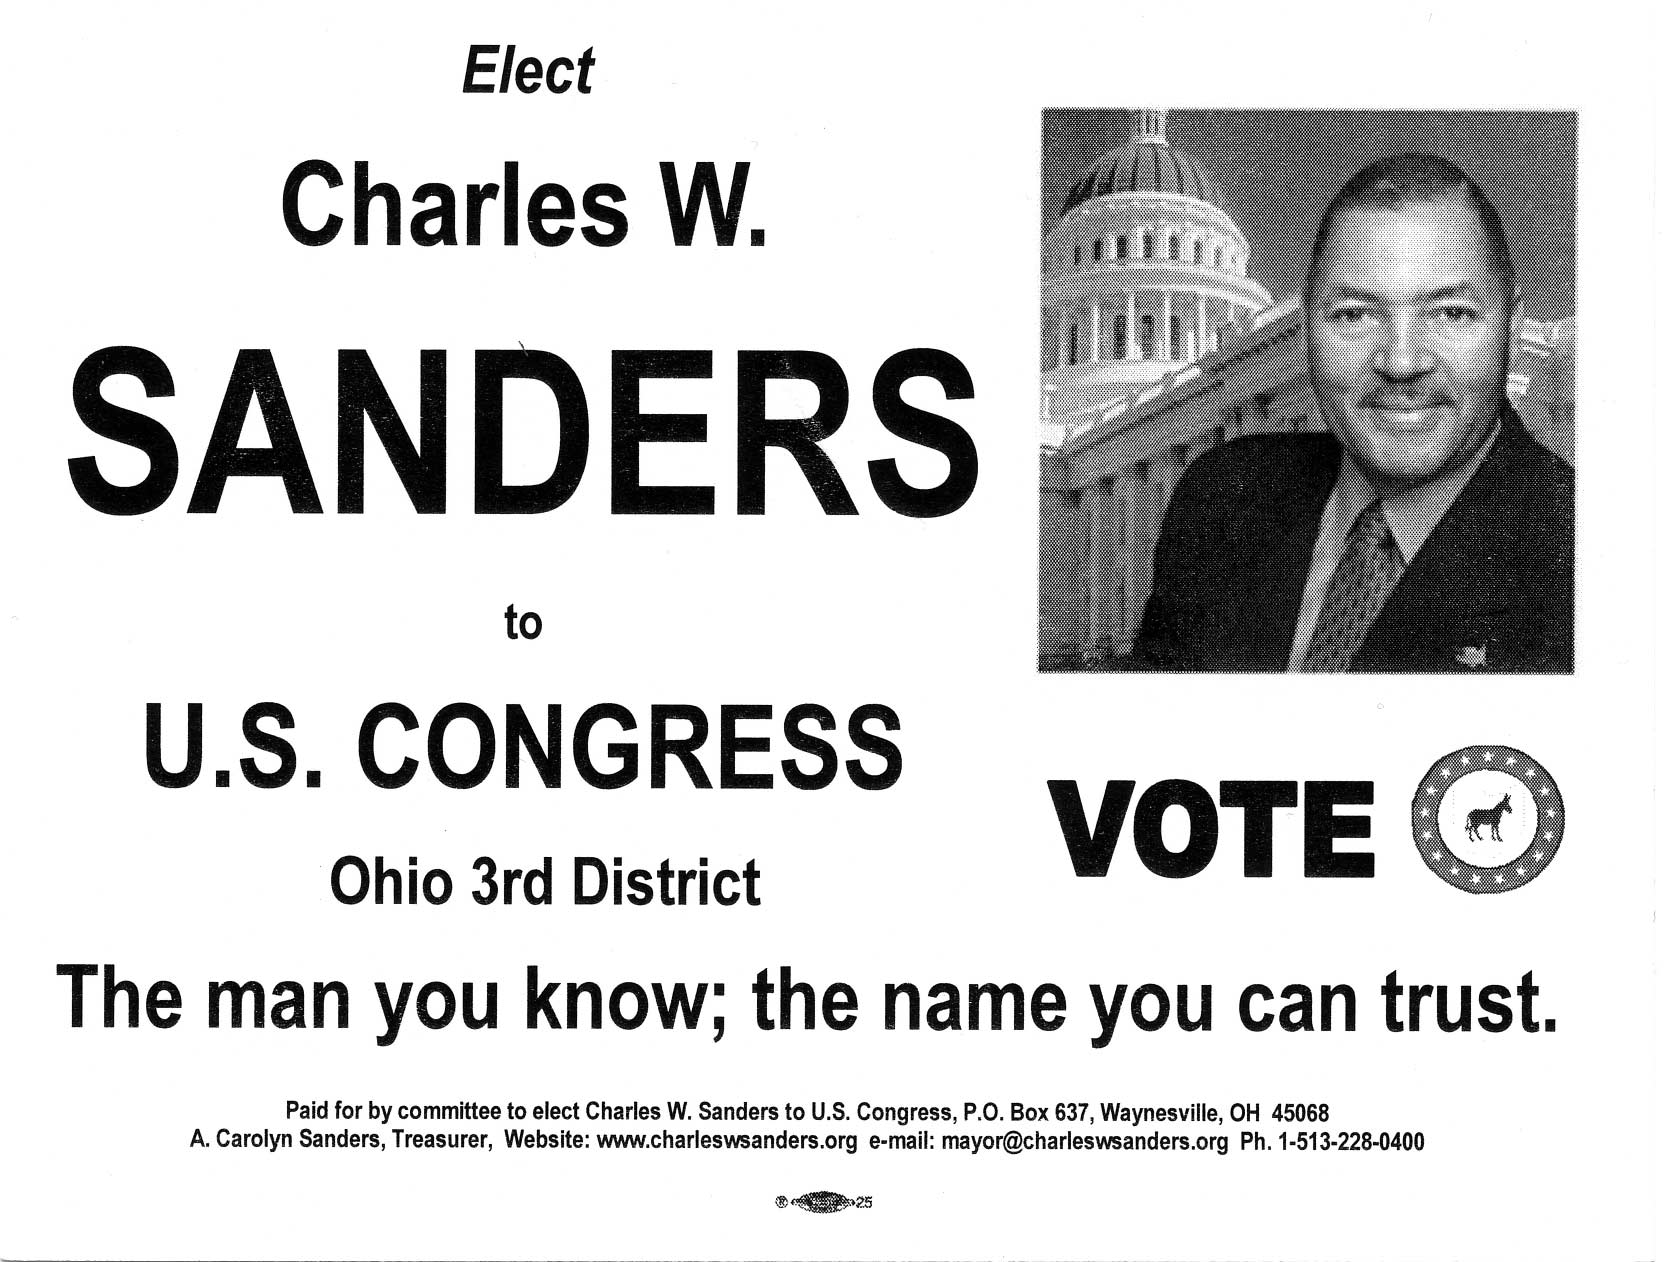 Scan of Charles W. Sanders campaign handout.